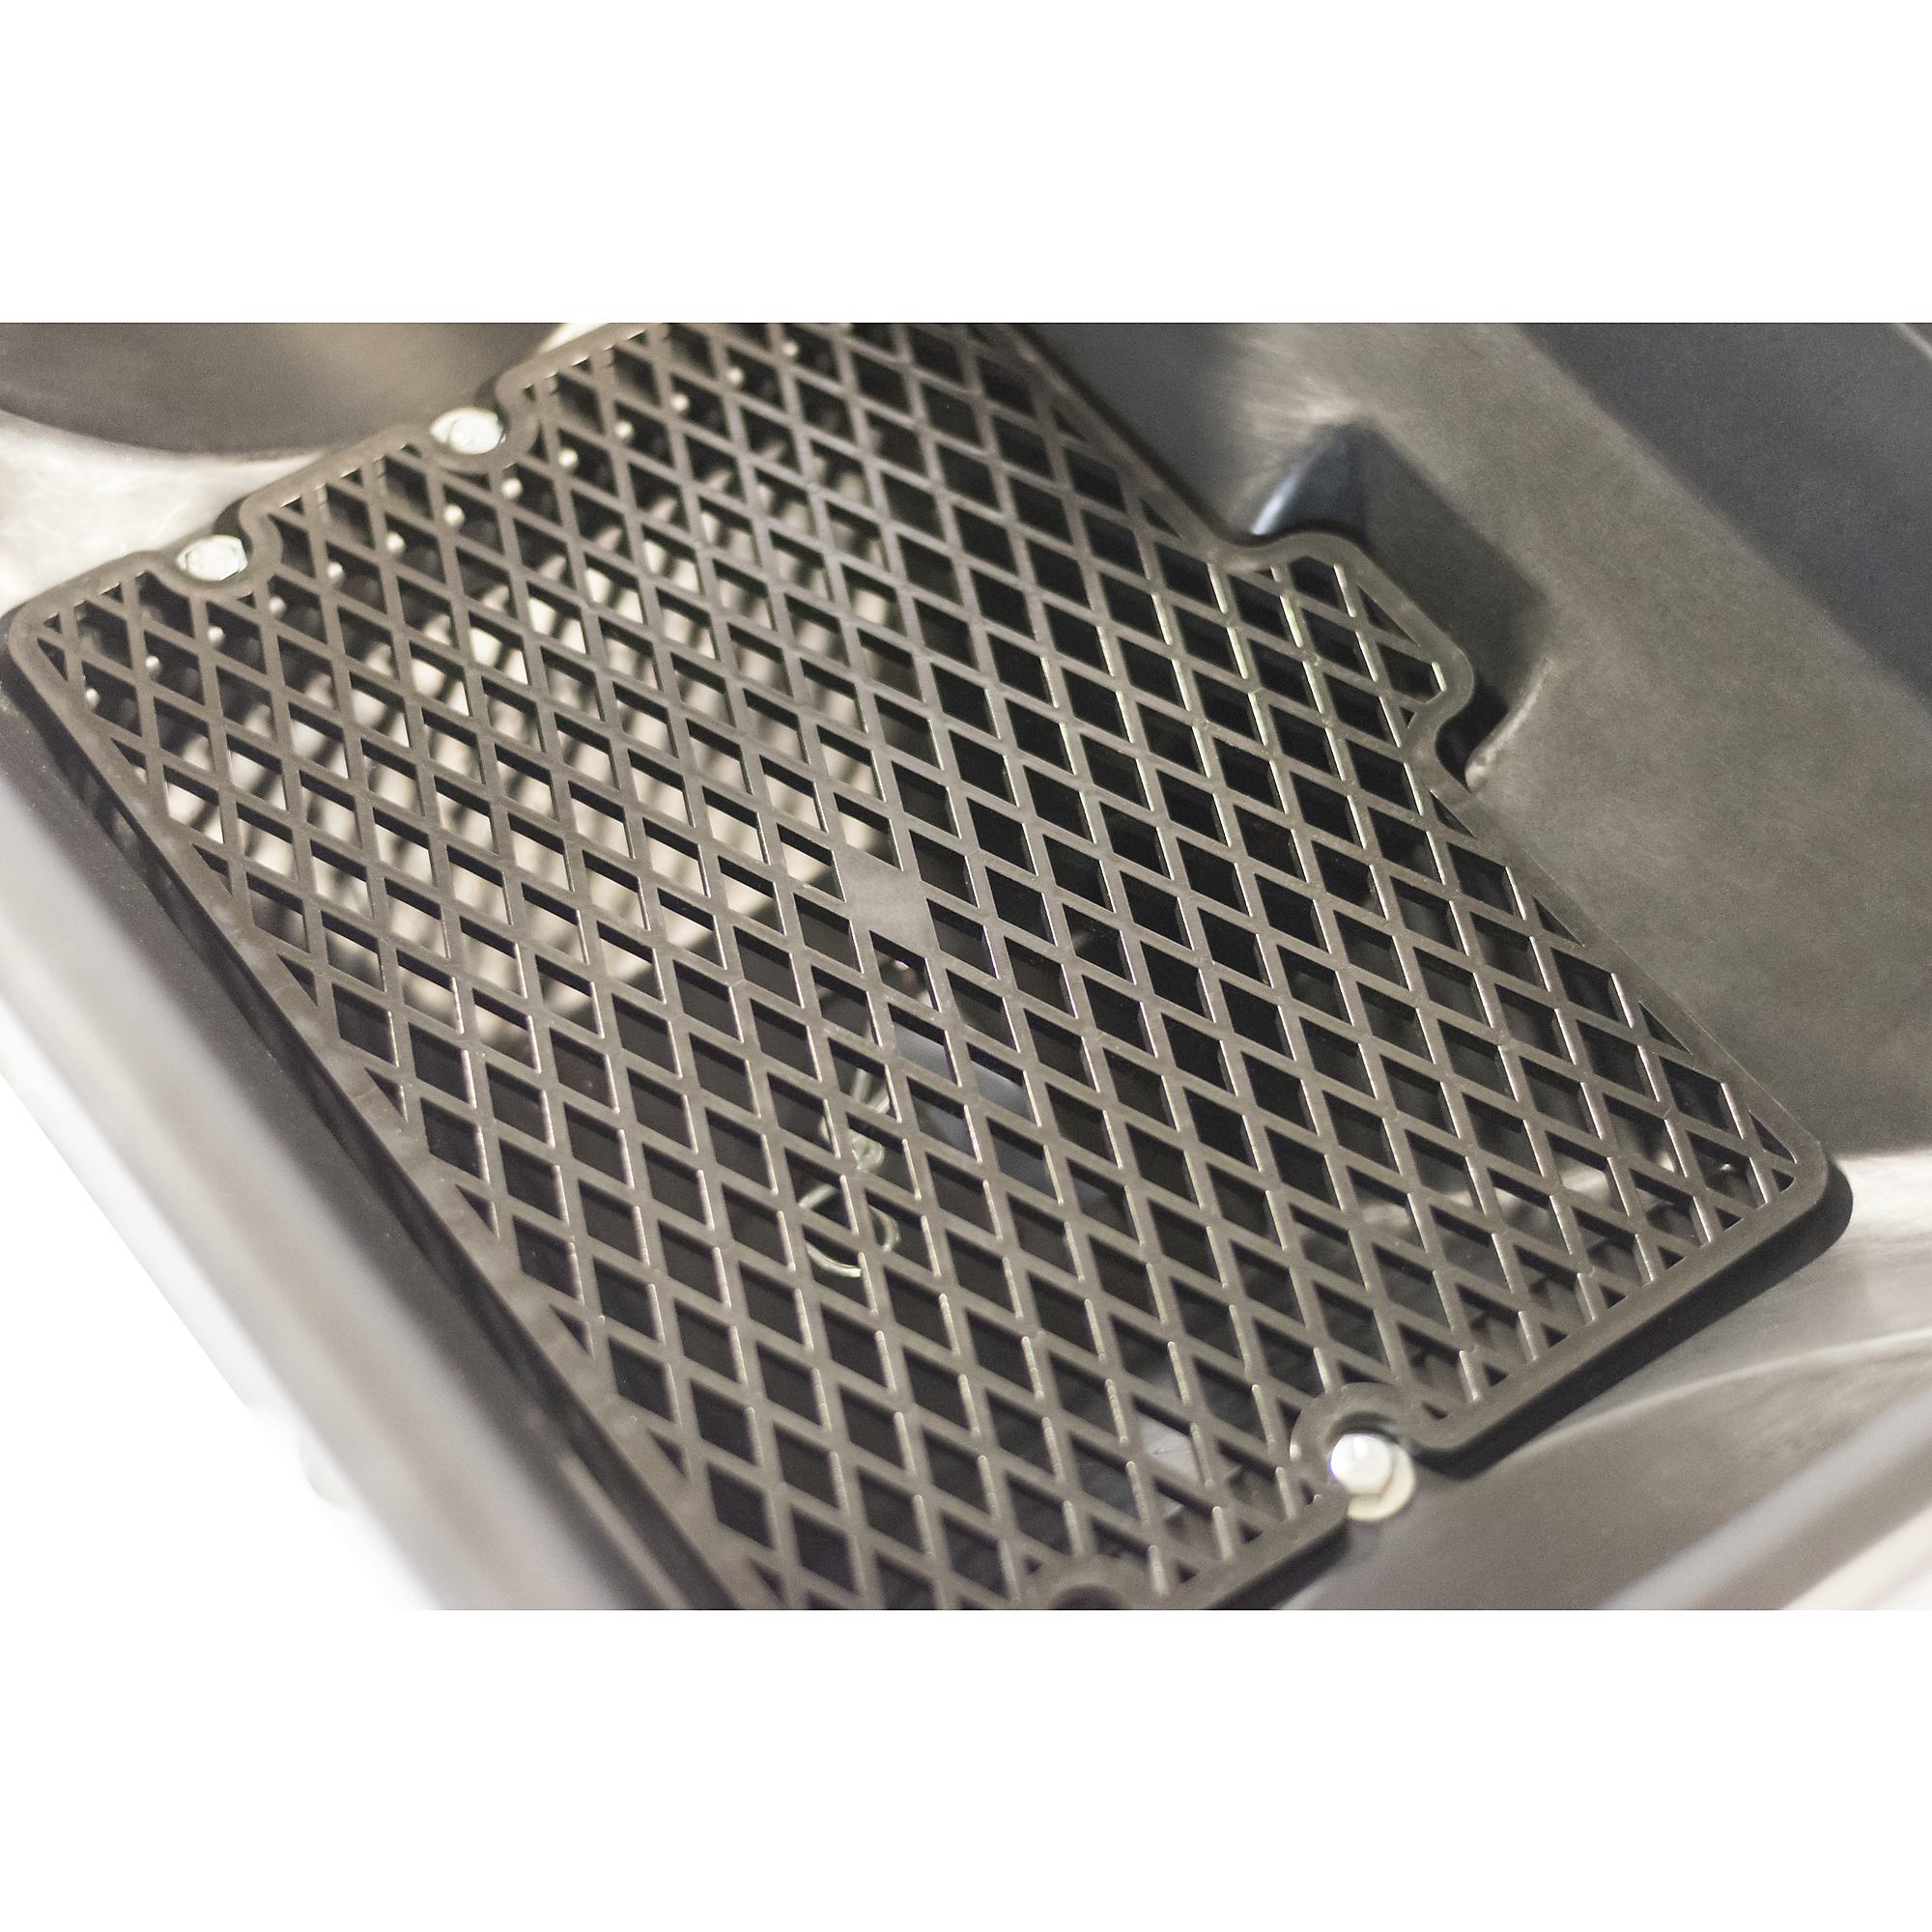 Agri-Fab, Grate for 85lb Spreaders, Model 69128